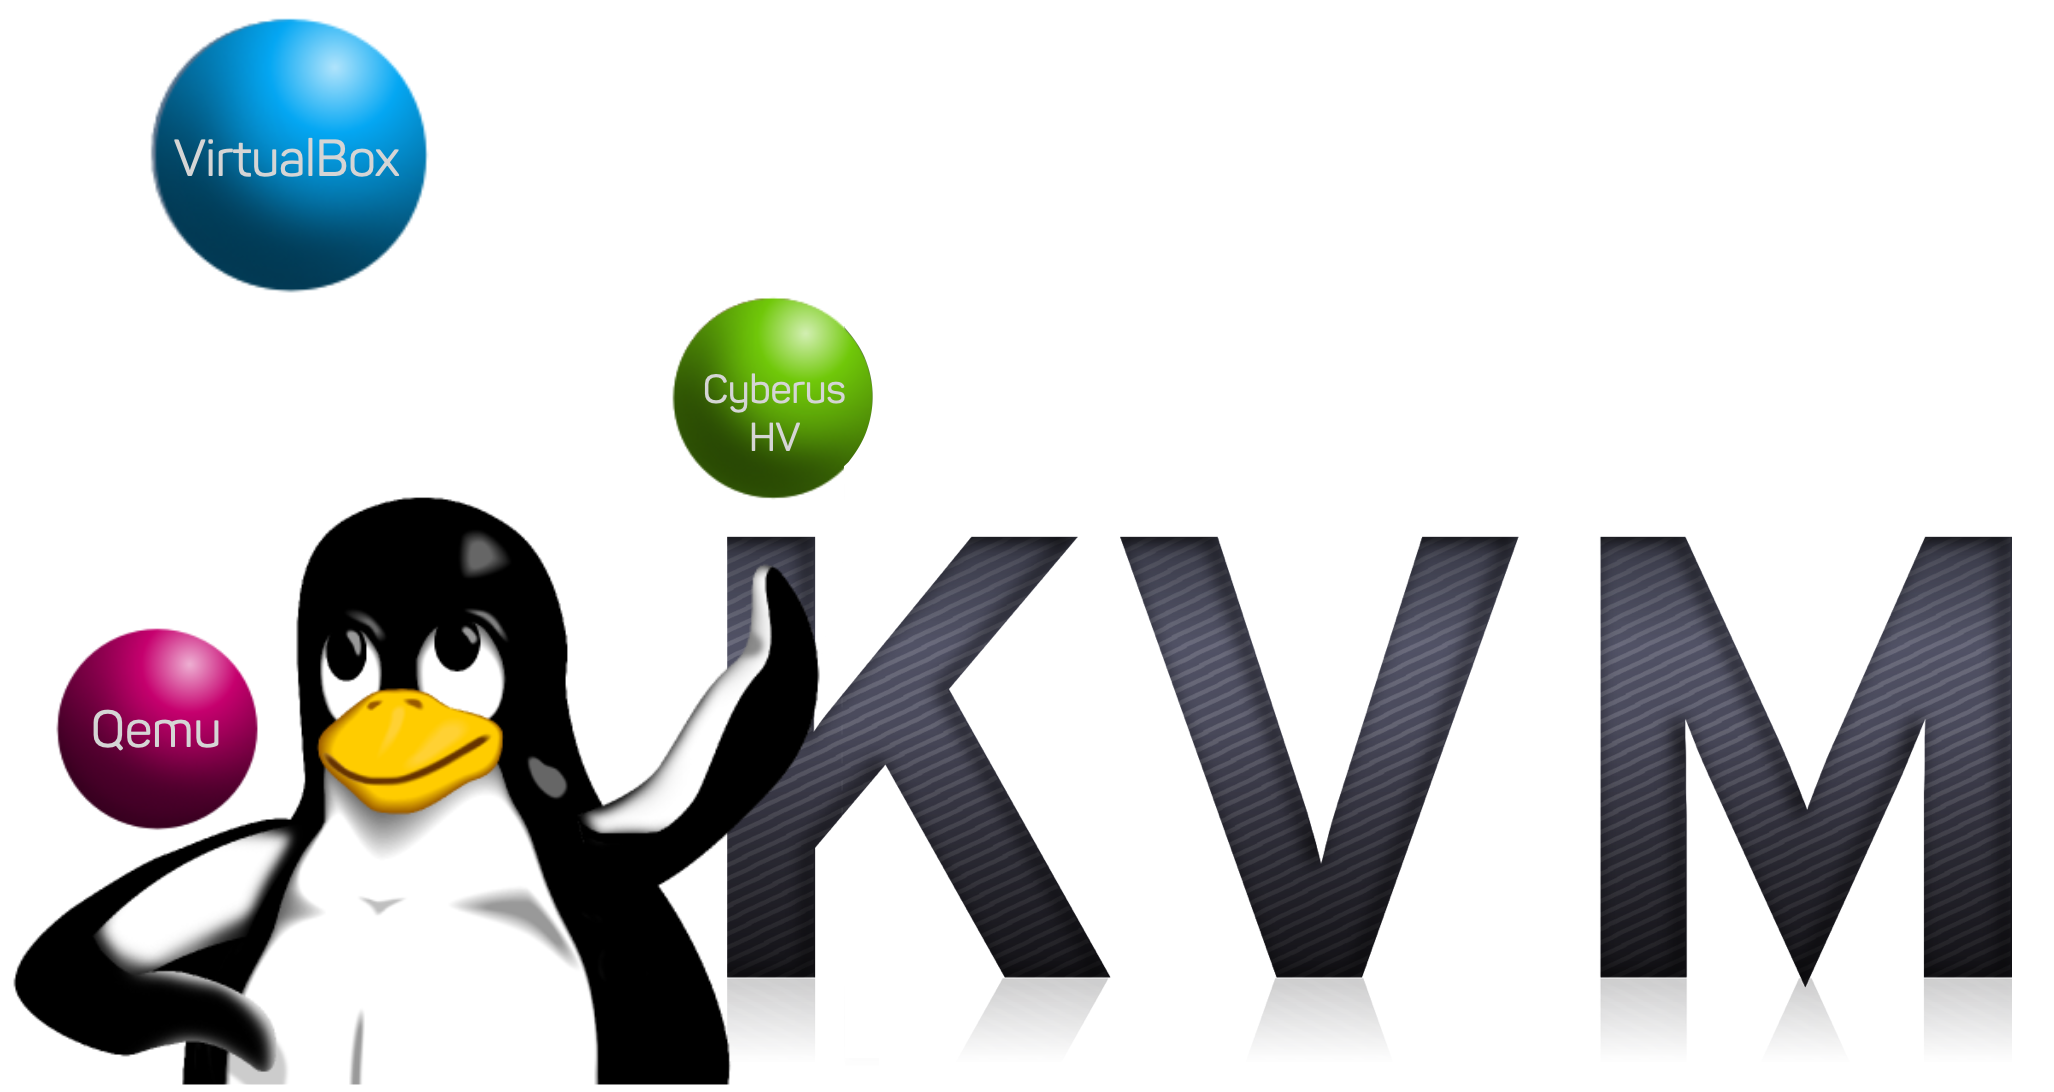 Today we are announcing the open-source release of our KVM backend for Virtualbox.